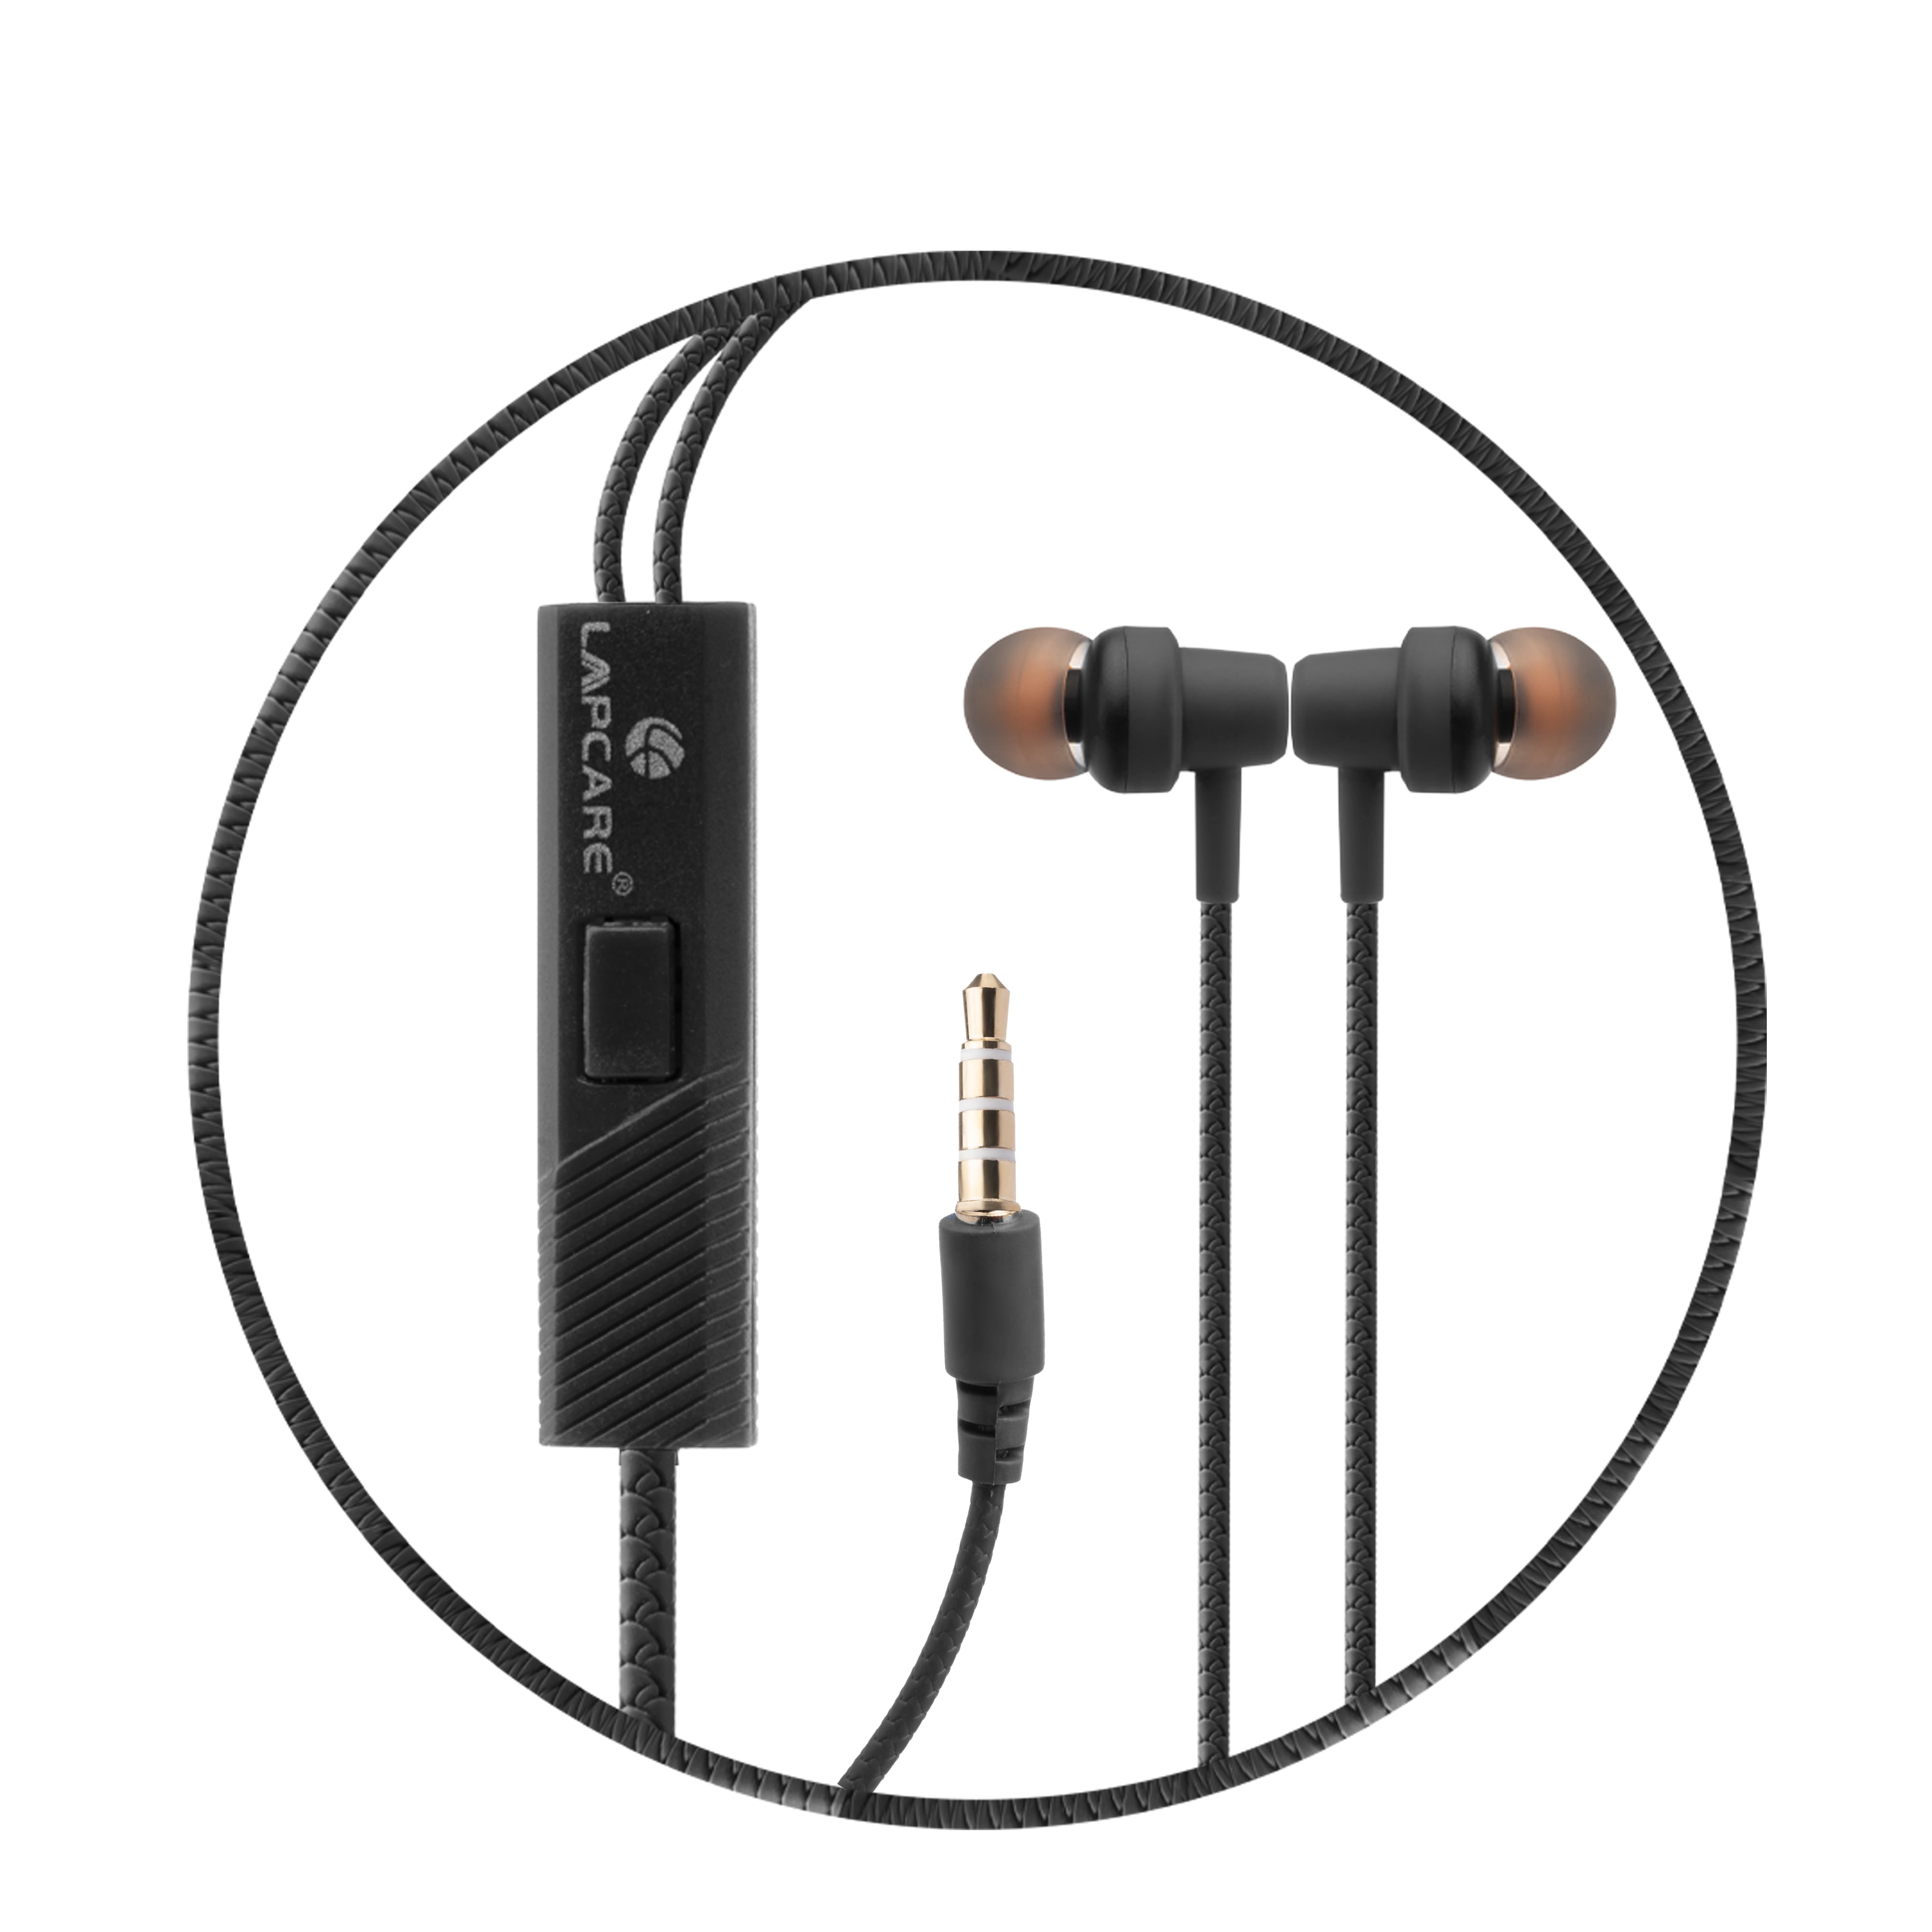 Lapcare WOOBUDS VII wired Earbuds with inbuilt MIC -Black (LBD-909)